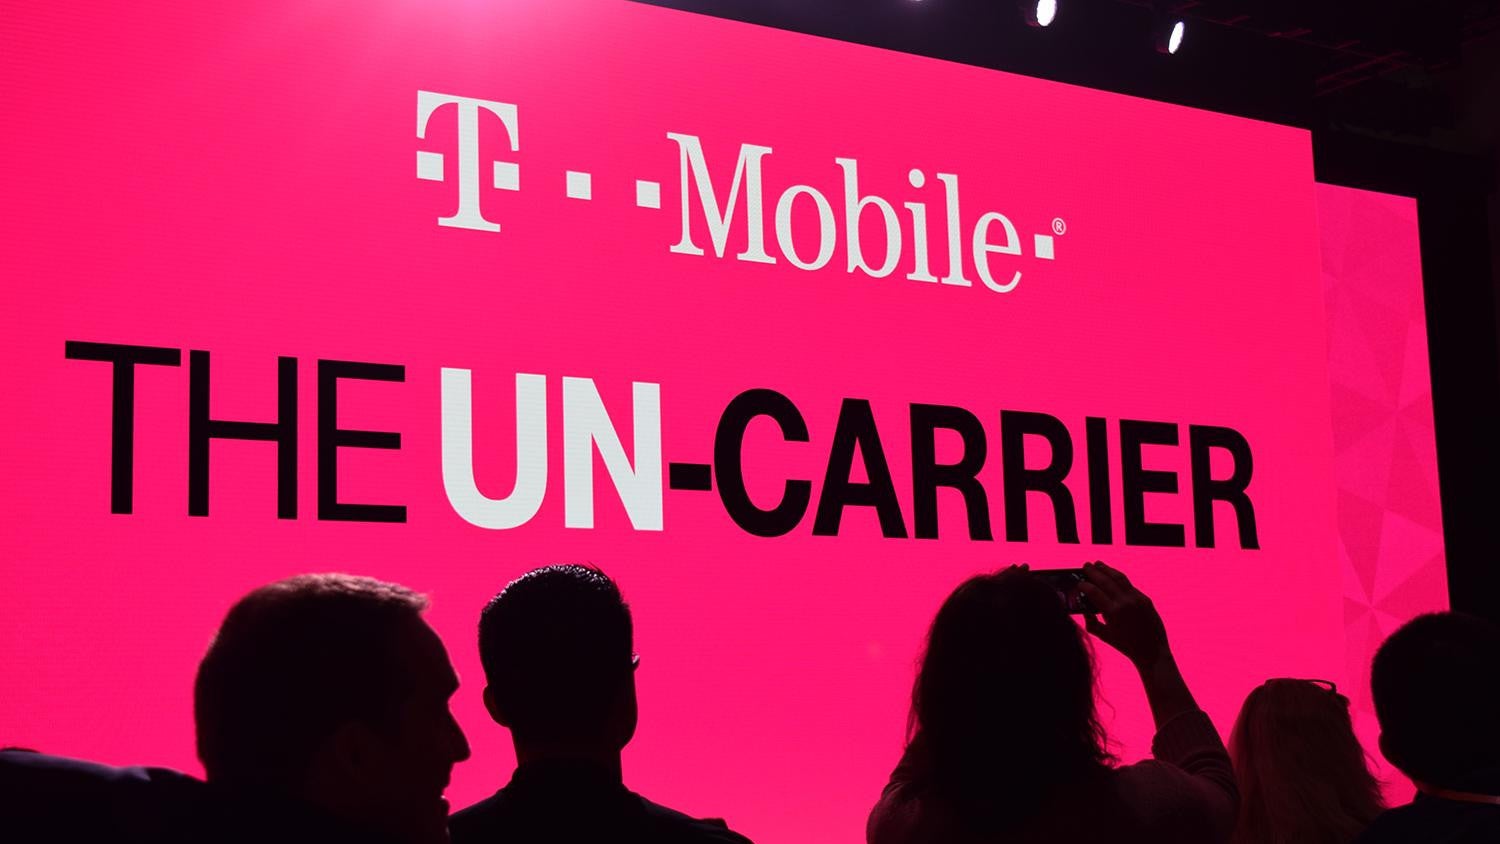 T-Mobile launches early Black Friday deals, BOGO offers for iPhone 8, Galaxy S8/S8+, Note 8, LG V30, and more